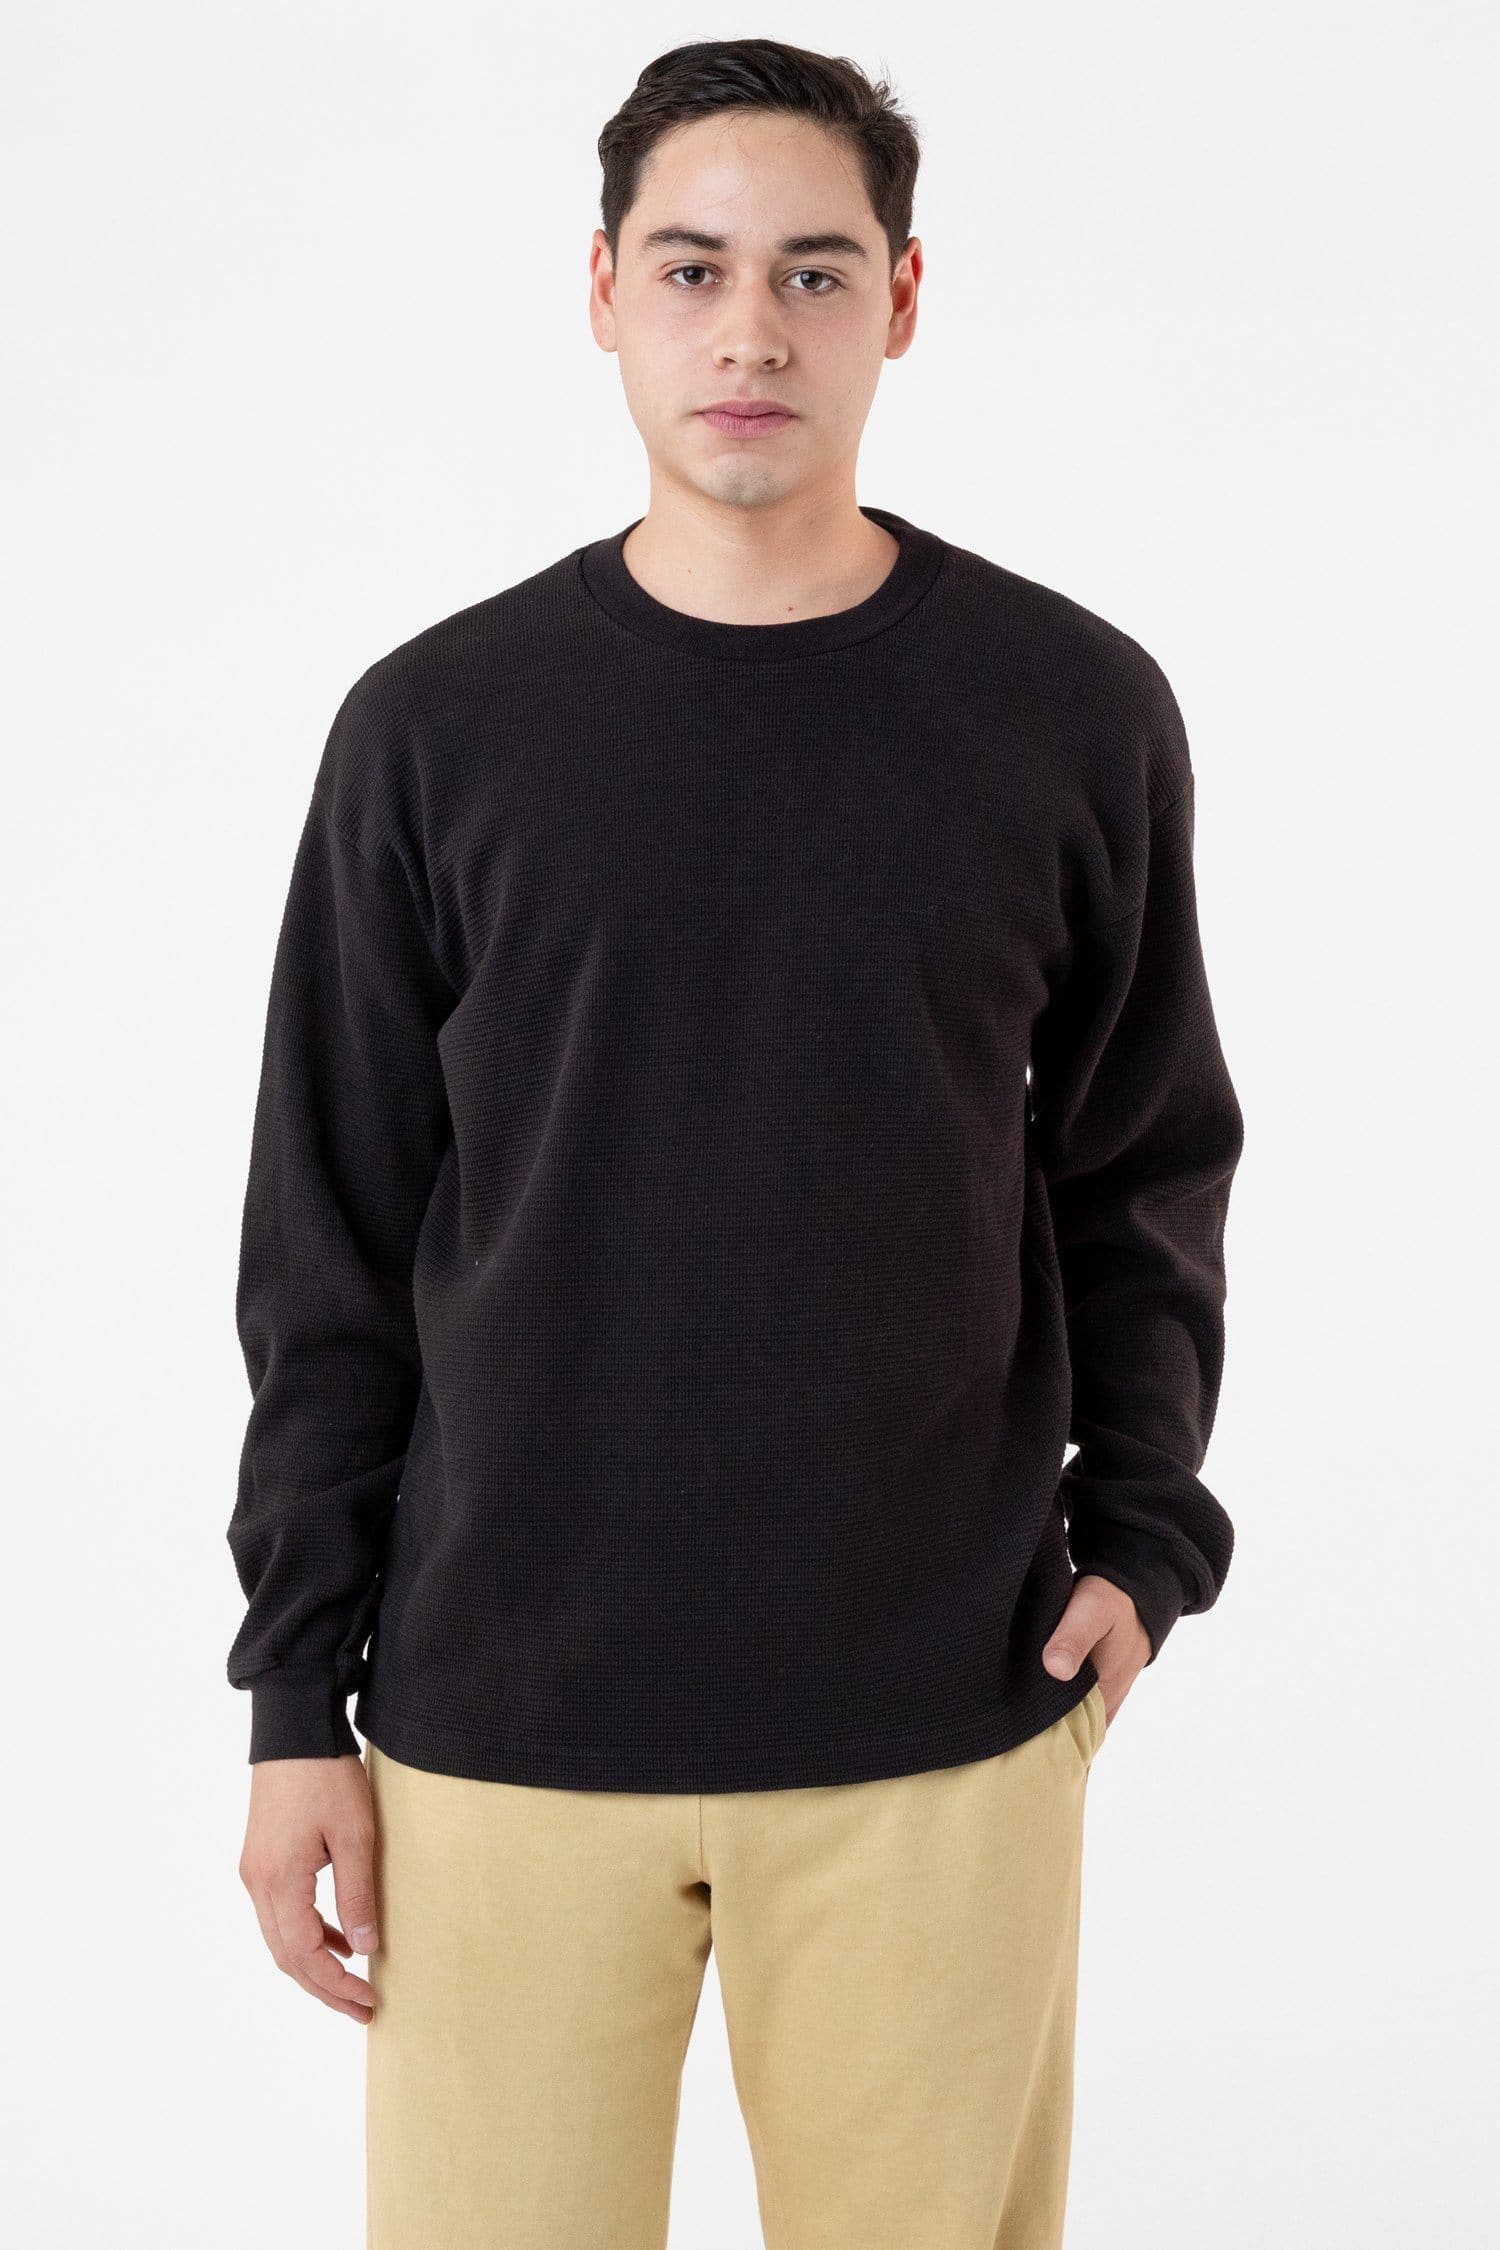 TX407GD - Long Sleeve Heavy Thermal Crew Neck